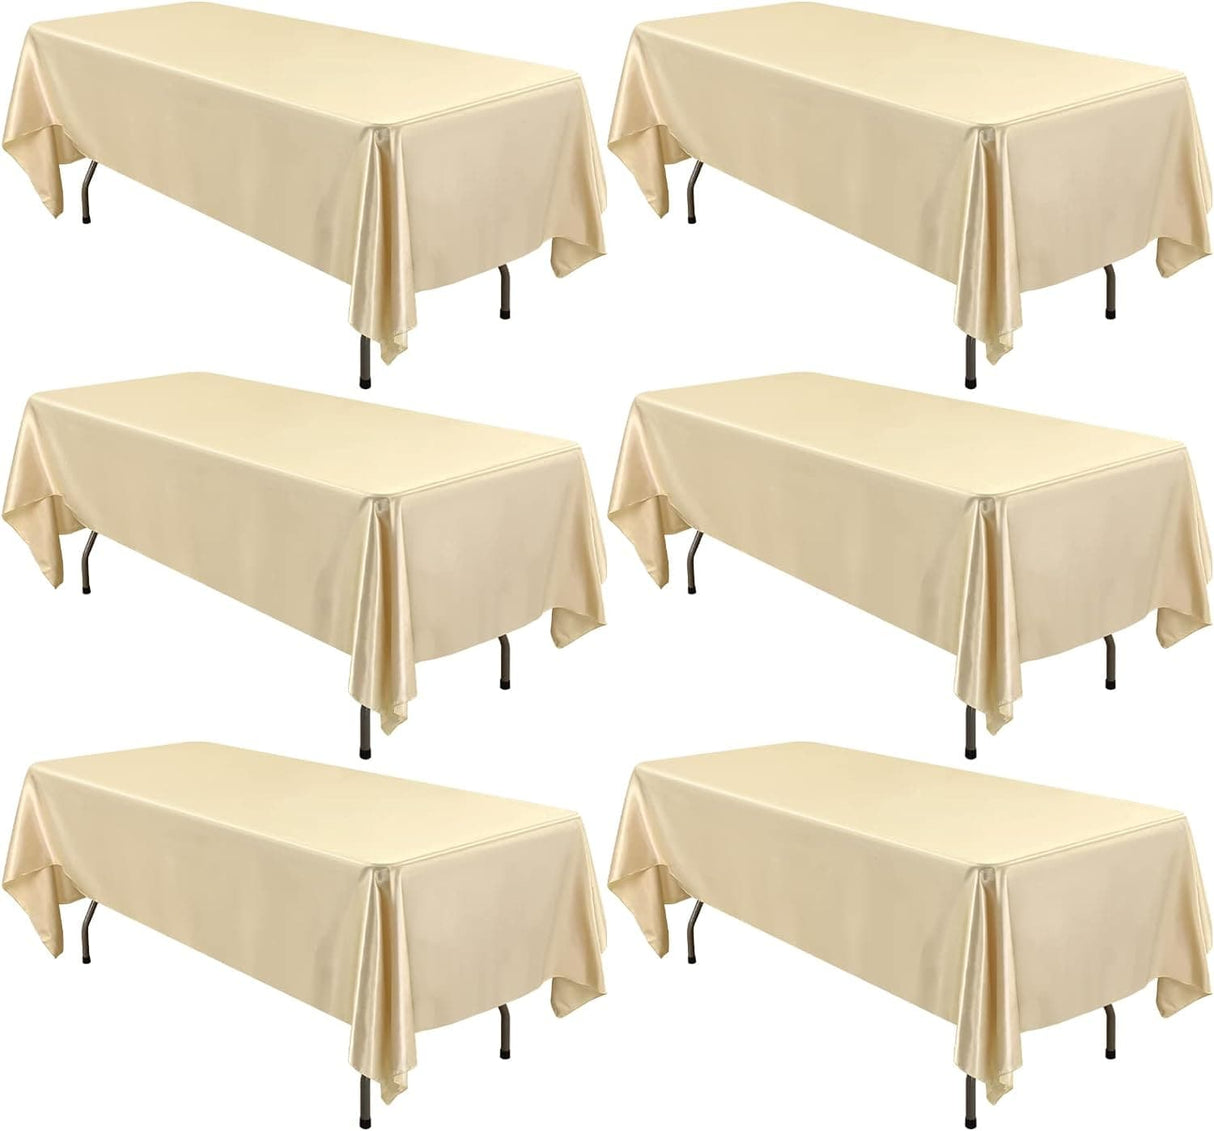 6/12 Pack Satin Tablecloth 57 x 108 Inch Overlay Satin Table Cover Premium Rectangle Bright Silk Tablecloth Smooth Fabric Table Decoration for Wedding Banquet Party Birthday Events Restaurant